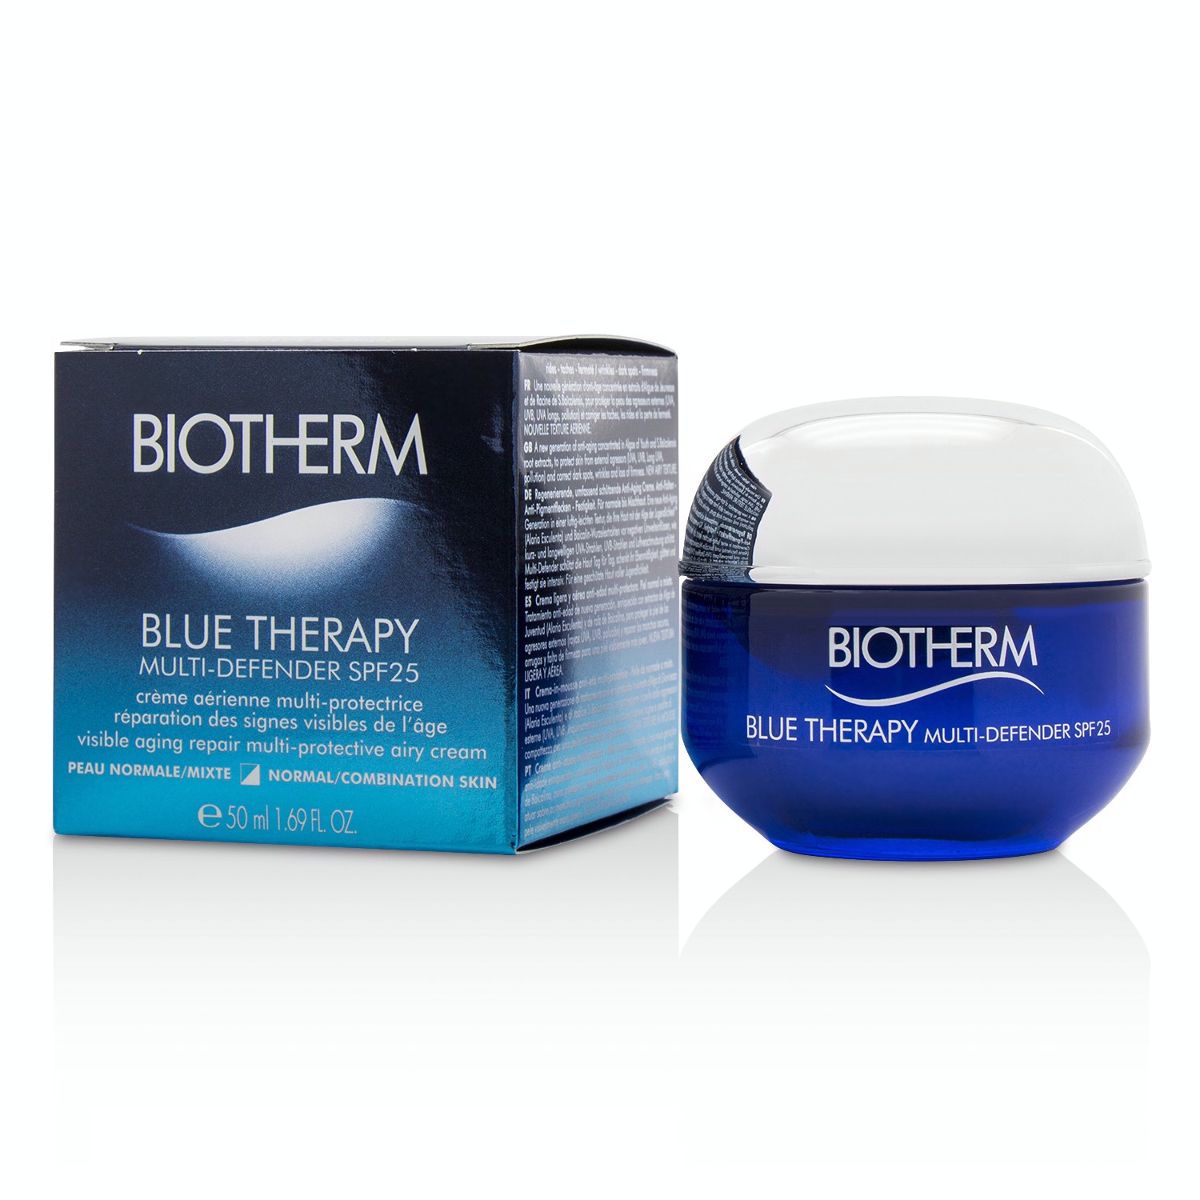 Blue Therapy Multi-Defender SPF 25 - Normal/Combination Skin Biotherm Image